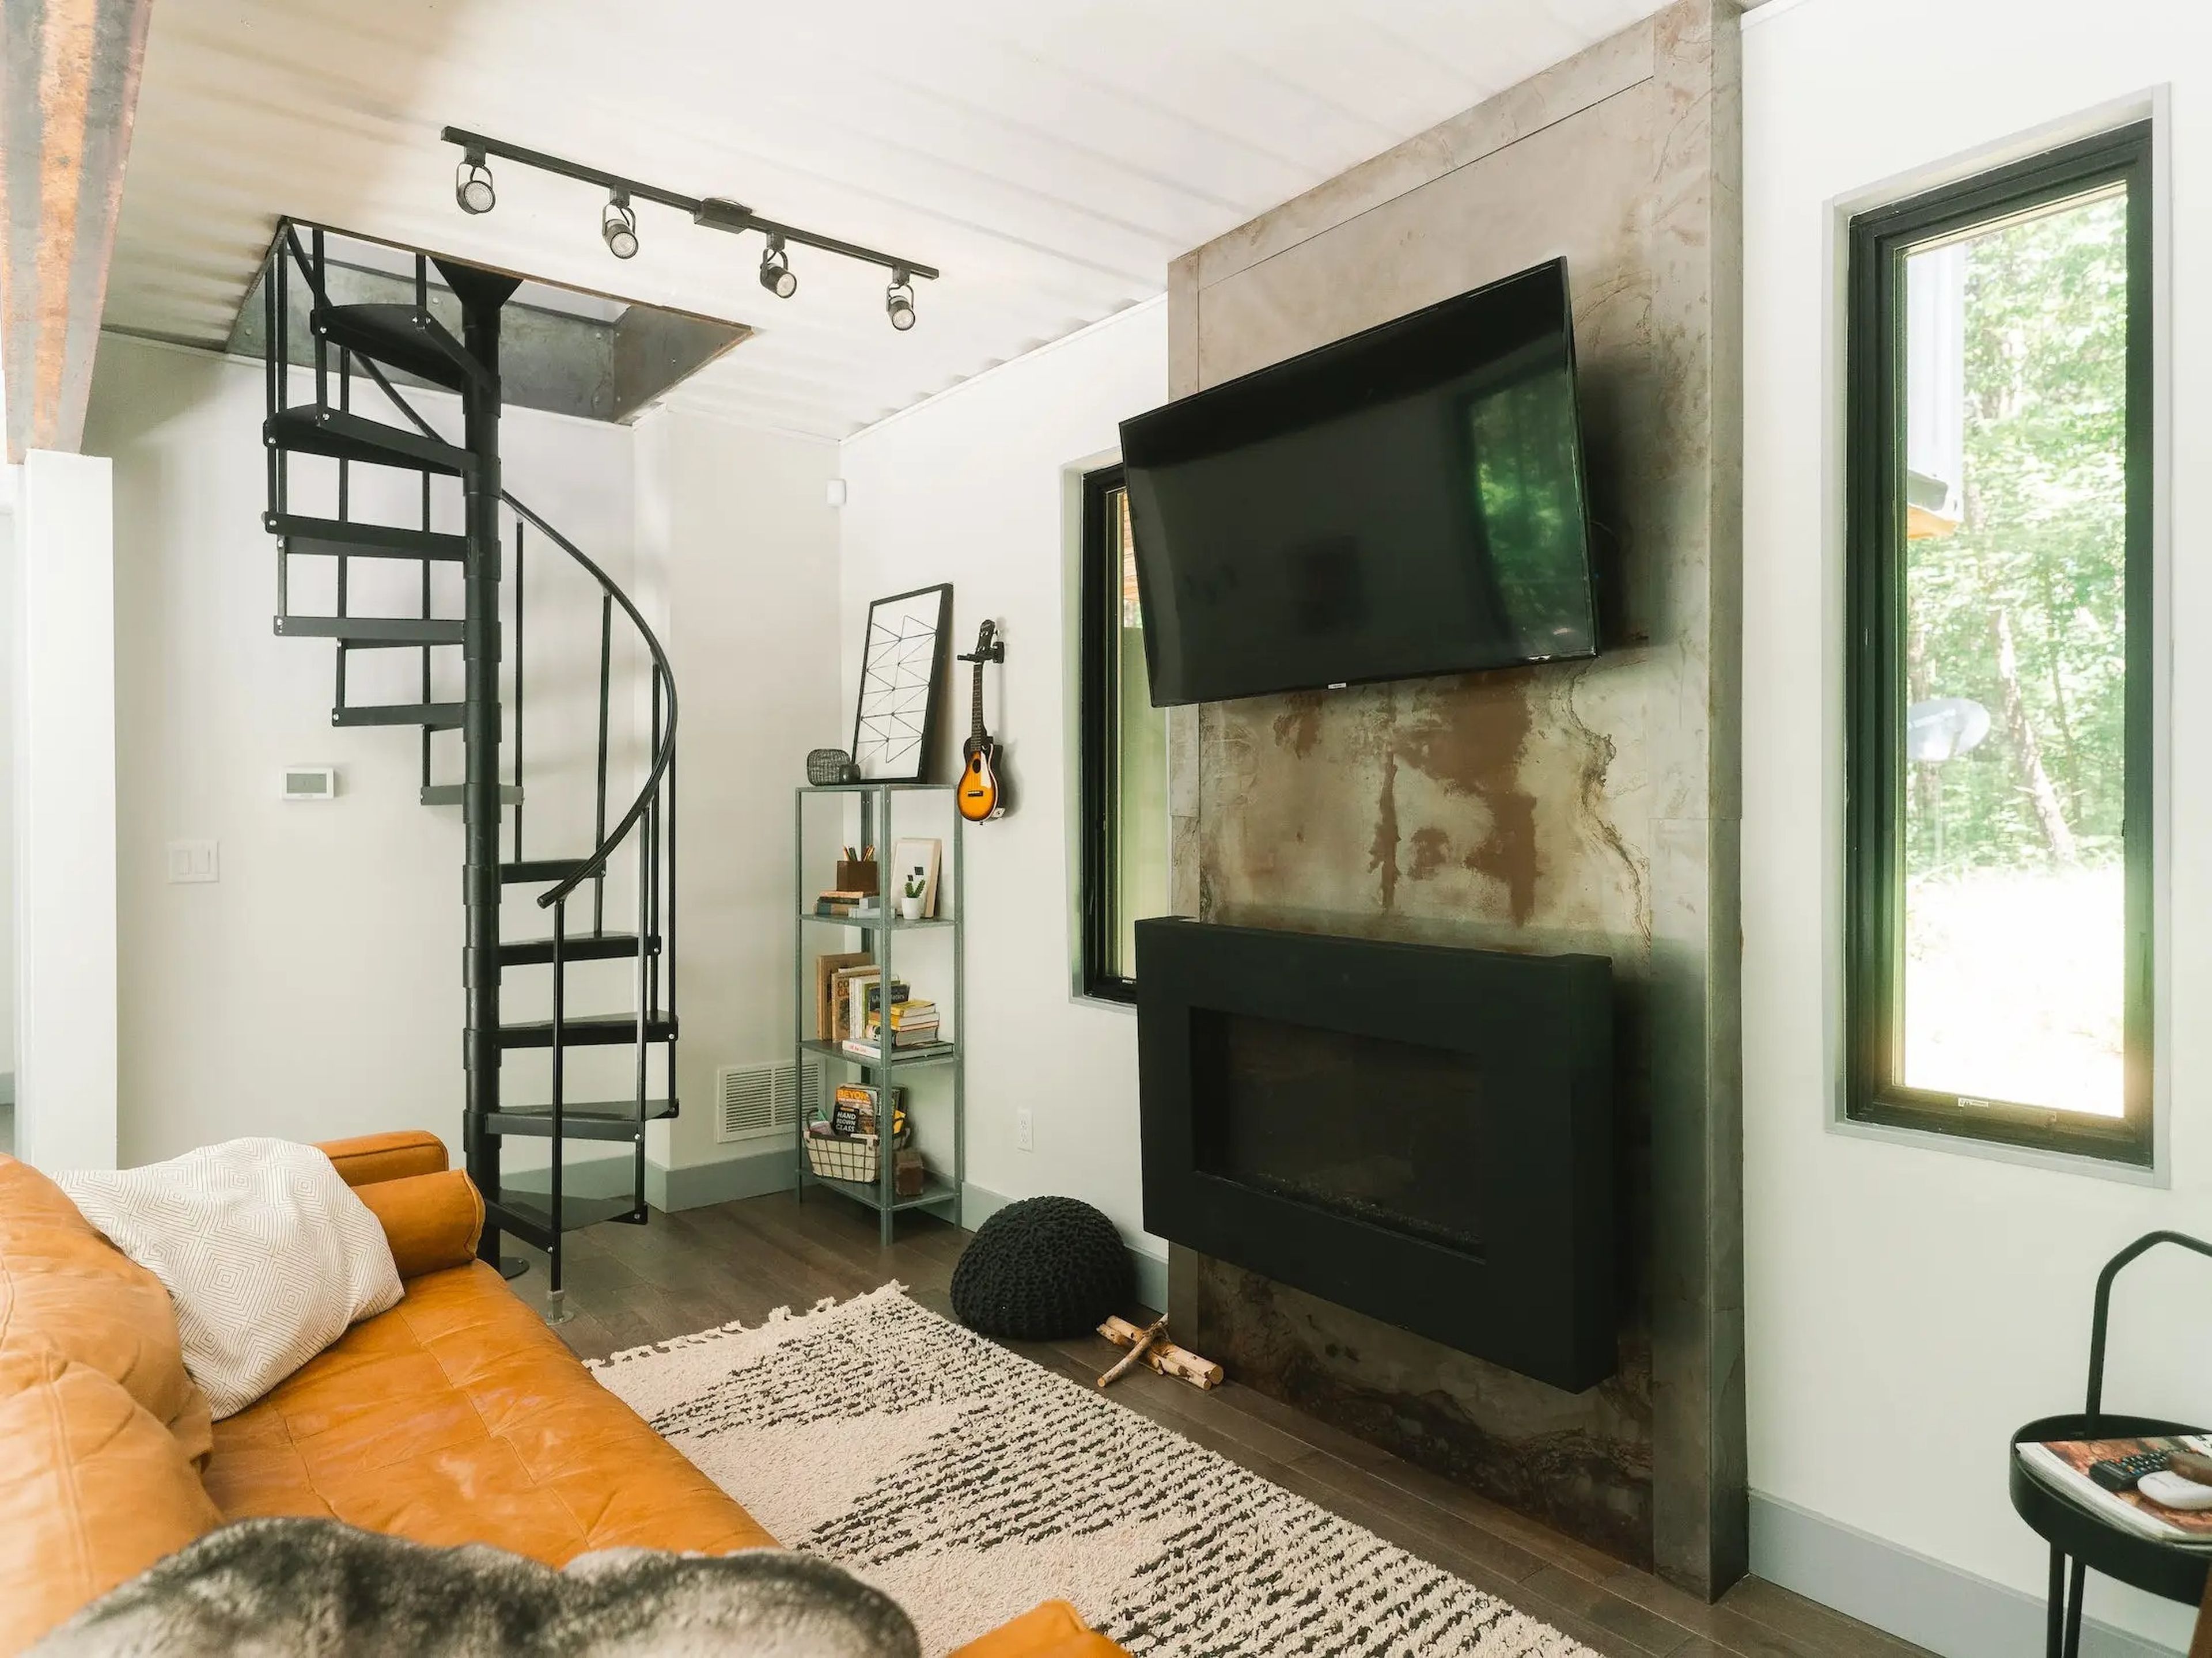 The living room with a couch, TV, fireplace inside the OG Box, a shipping container home.